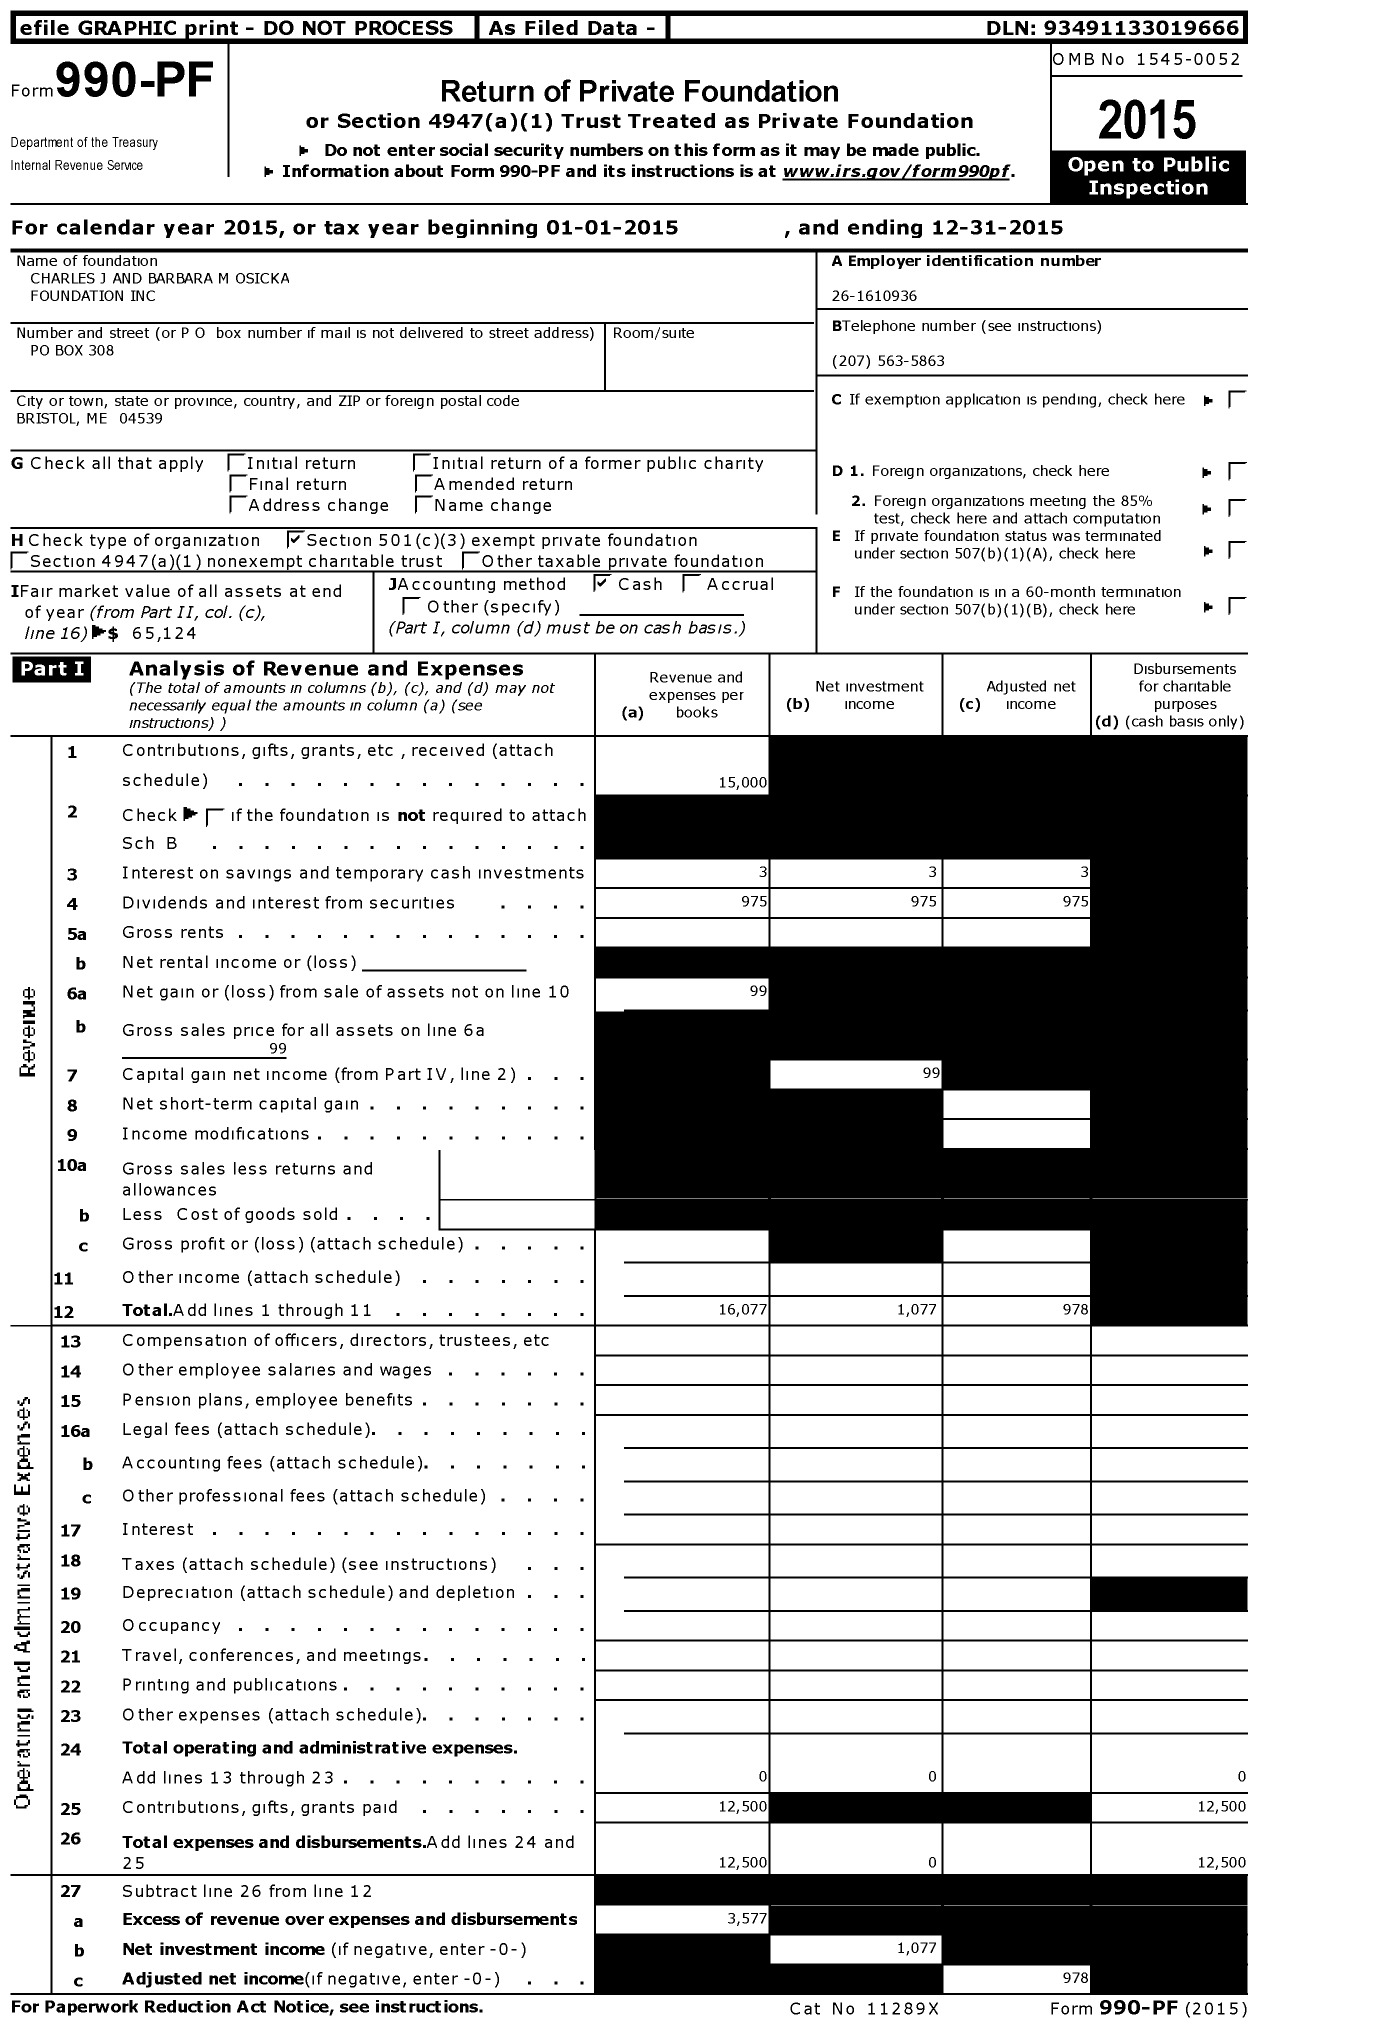 Image of first page of 2015 Form 990PF for Charles J and Barbara M Osicka Foundation